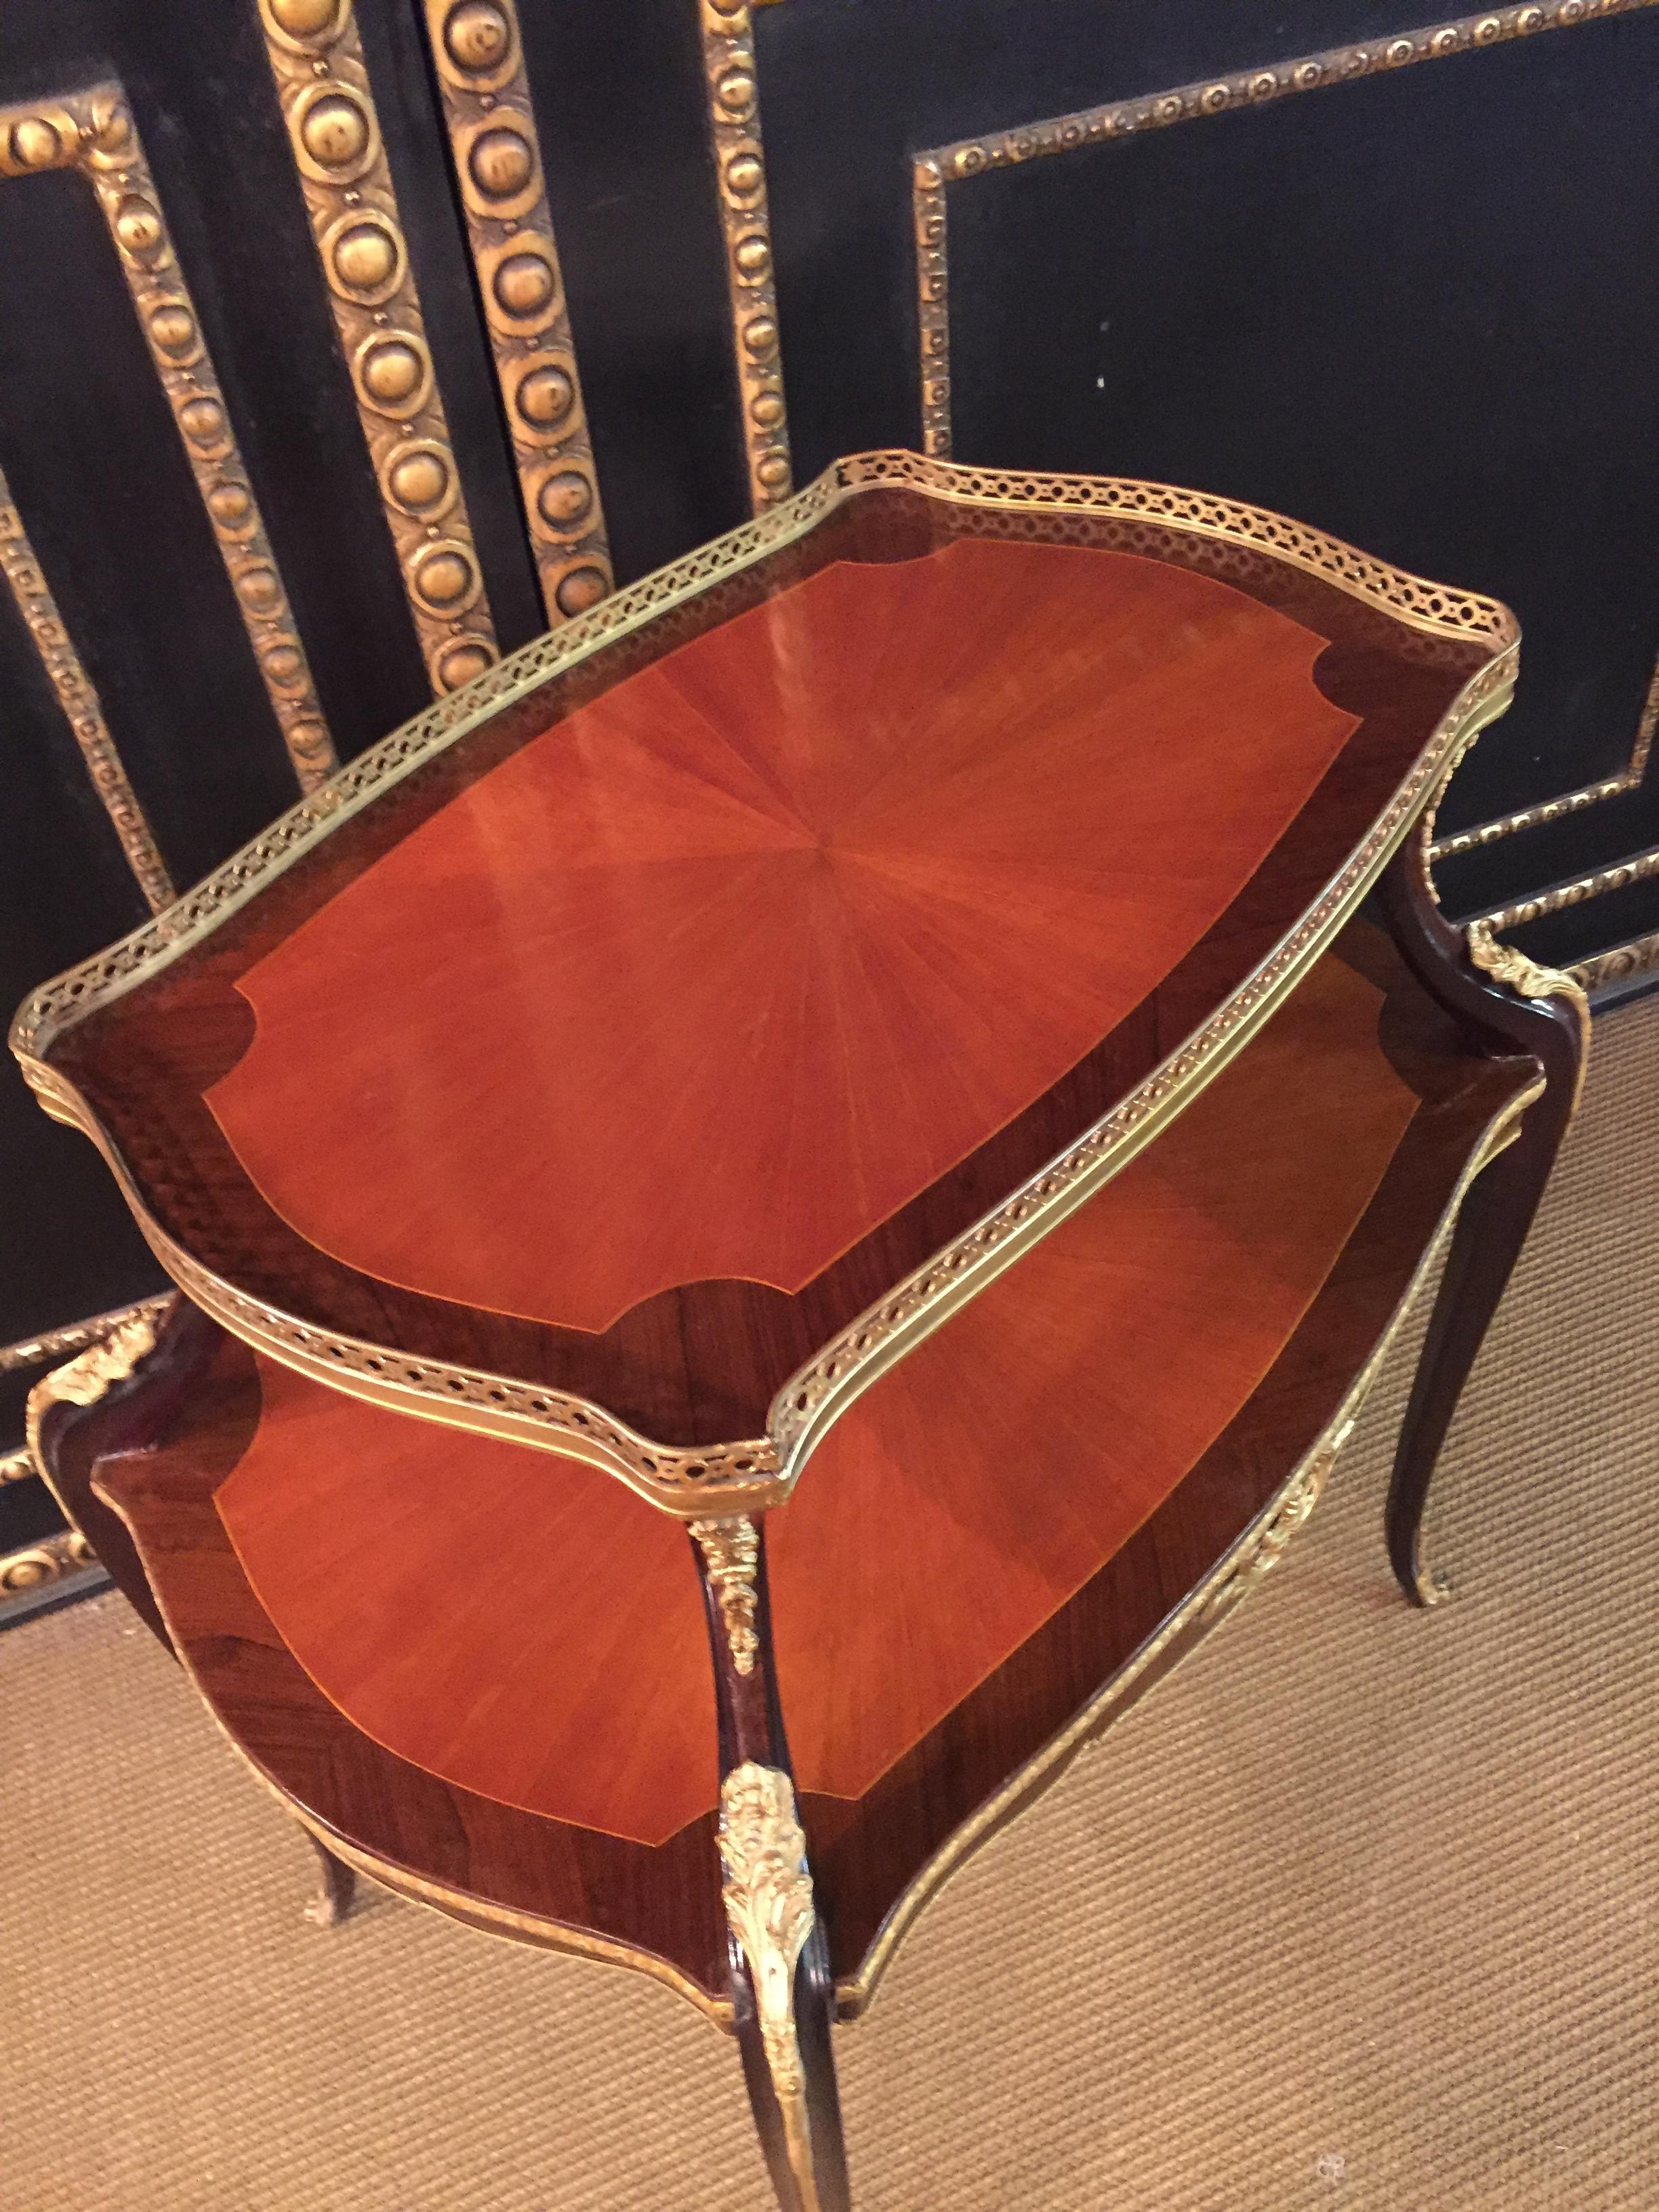 Unique French Side Table or Étagère antique after F. Linke mahogany veneer For Sale 4